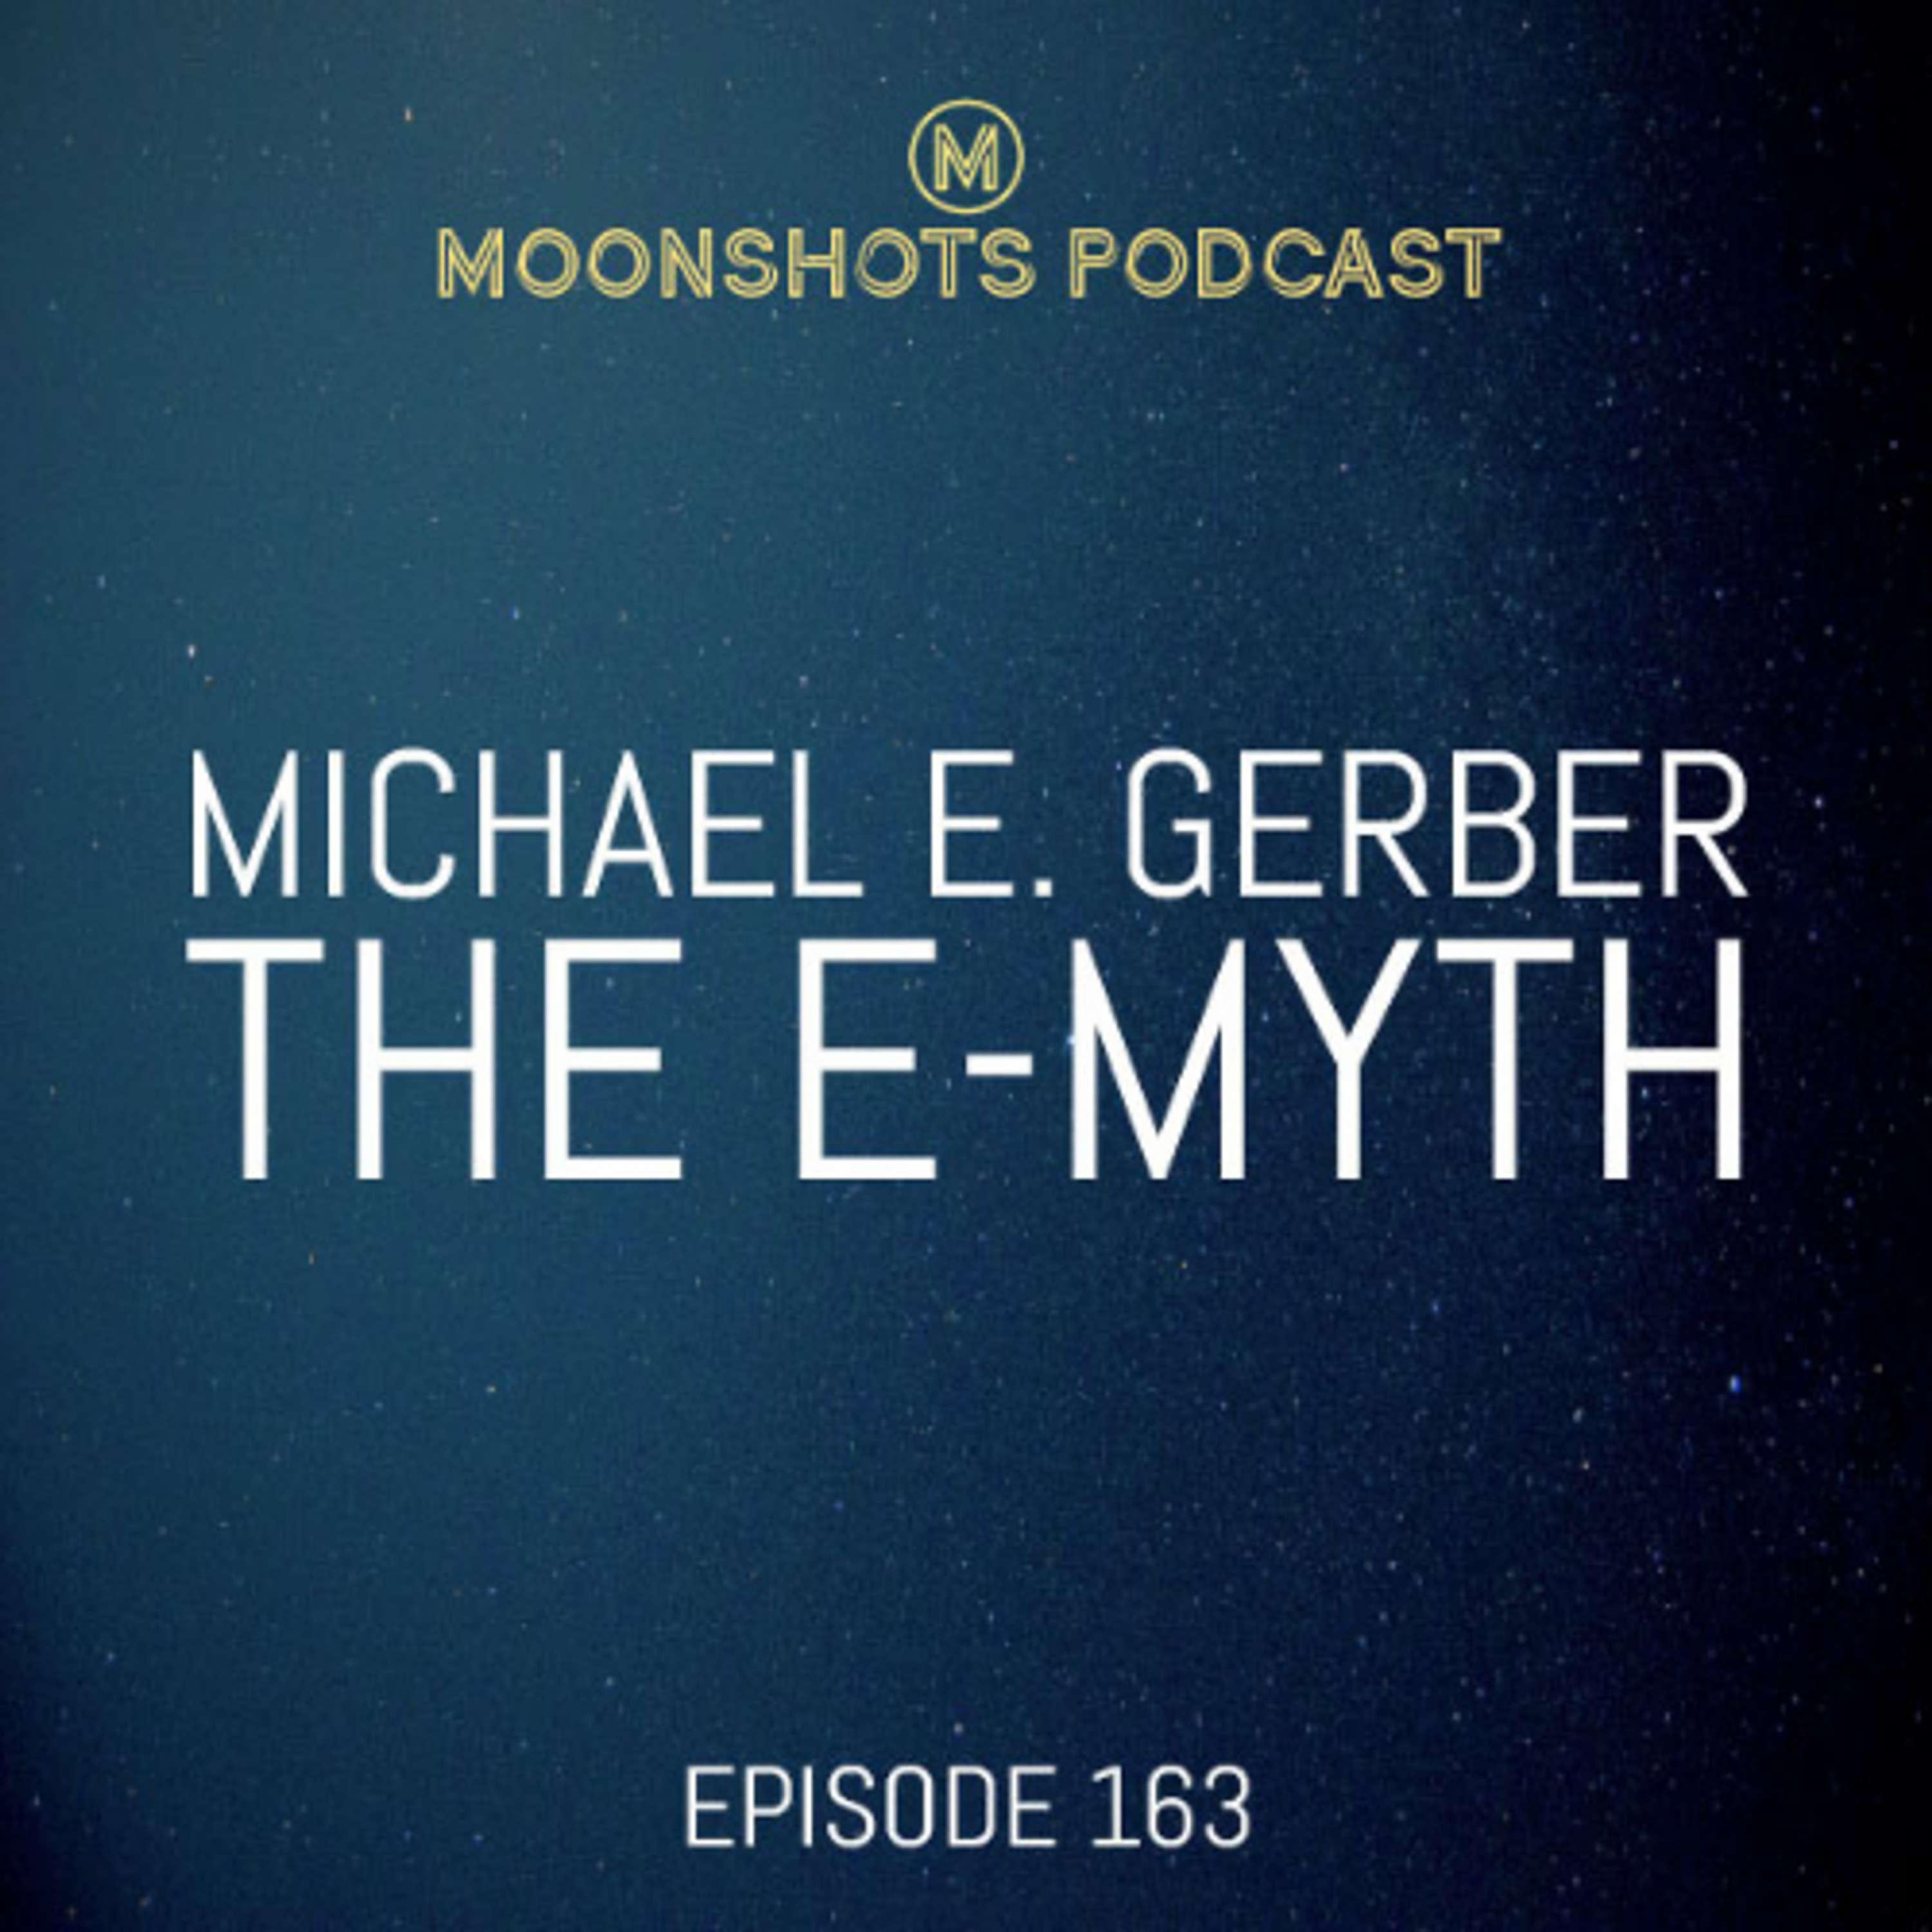 The E Myth by Michael E. Gerber - Why Most Small Businesses Don't Work and What to Do About It